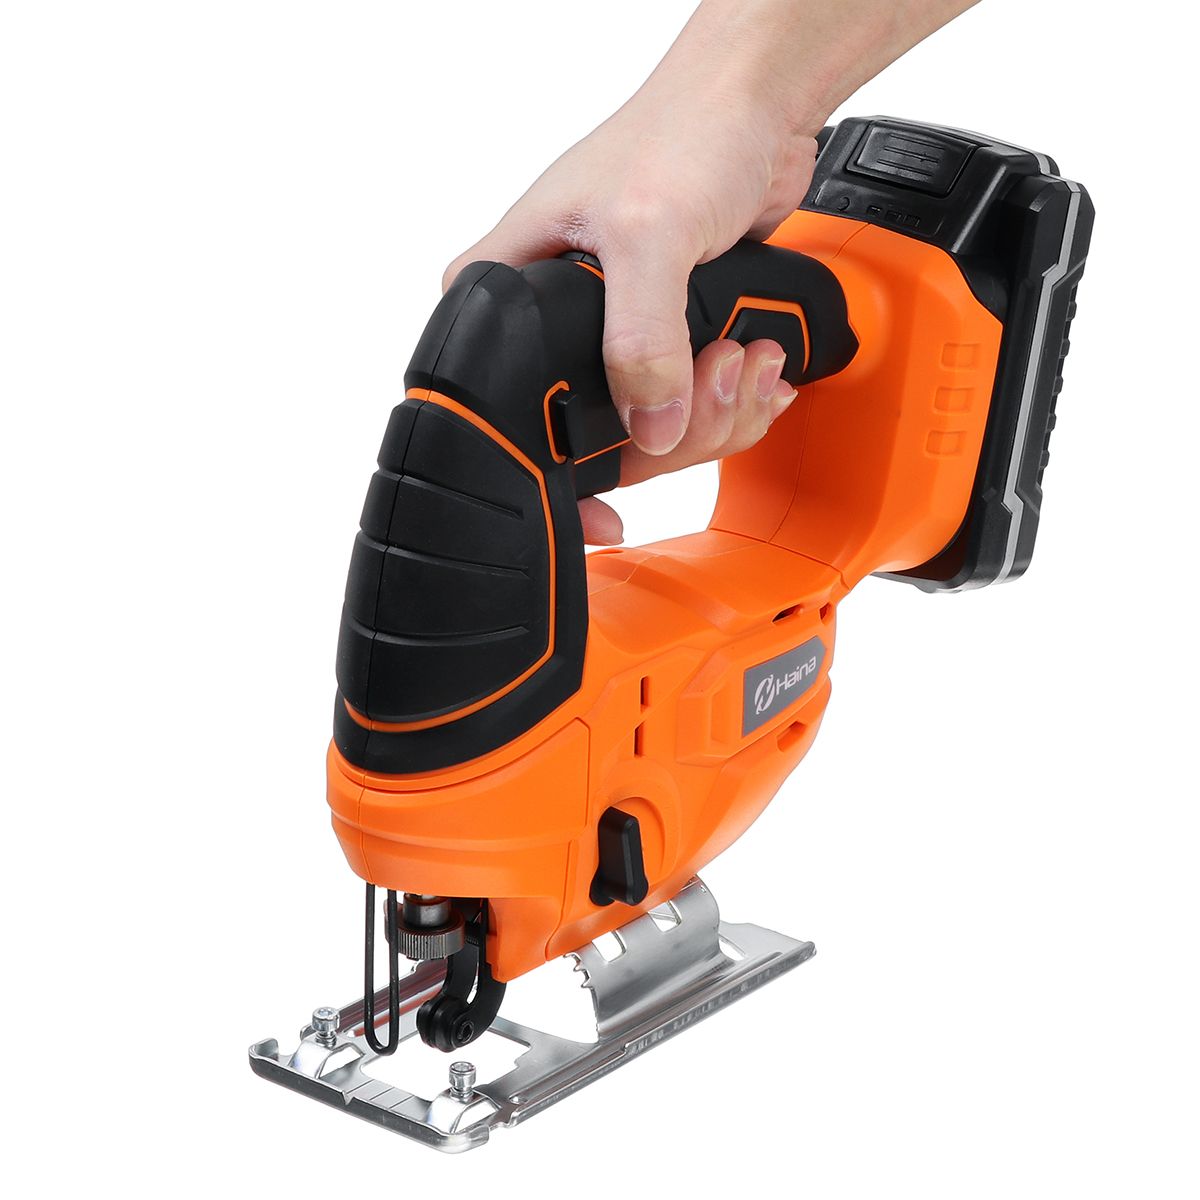 21V-65mm-Multi-function-Portable-Power-Saws-Electric-Curved-Saw-Woodworking-1743835